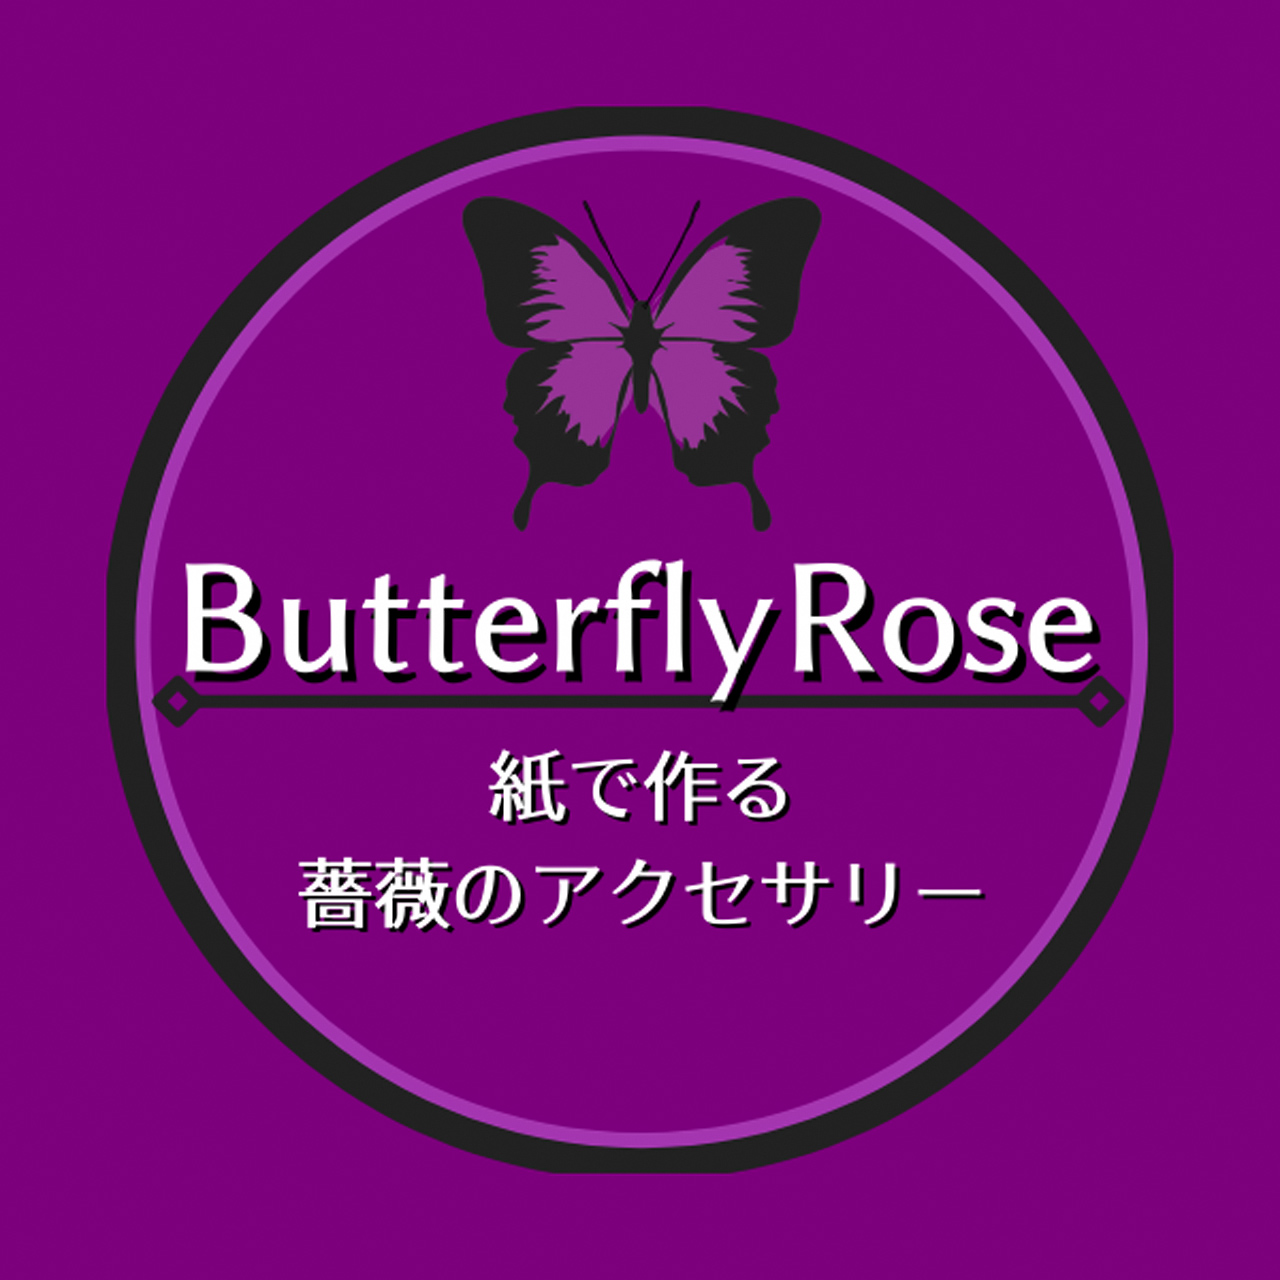 Butterfly Rose - バタフライローズ